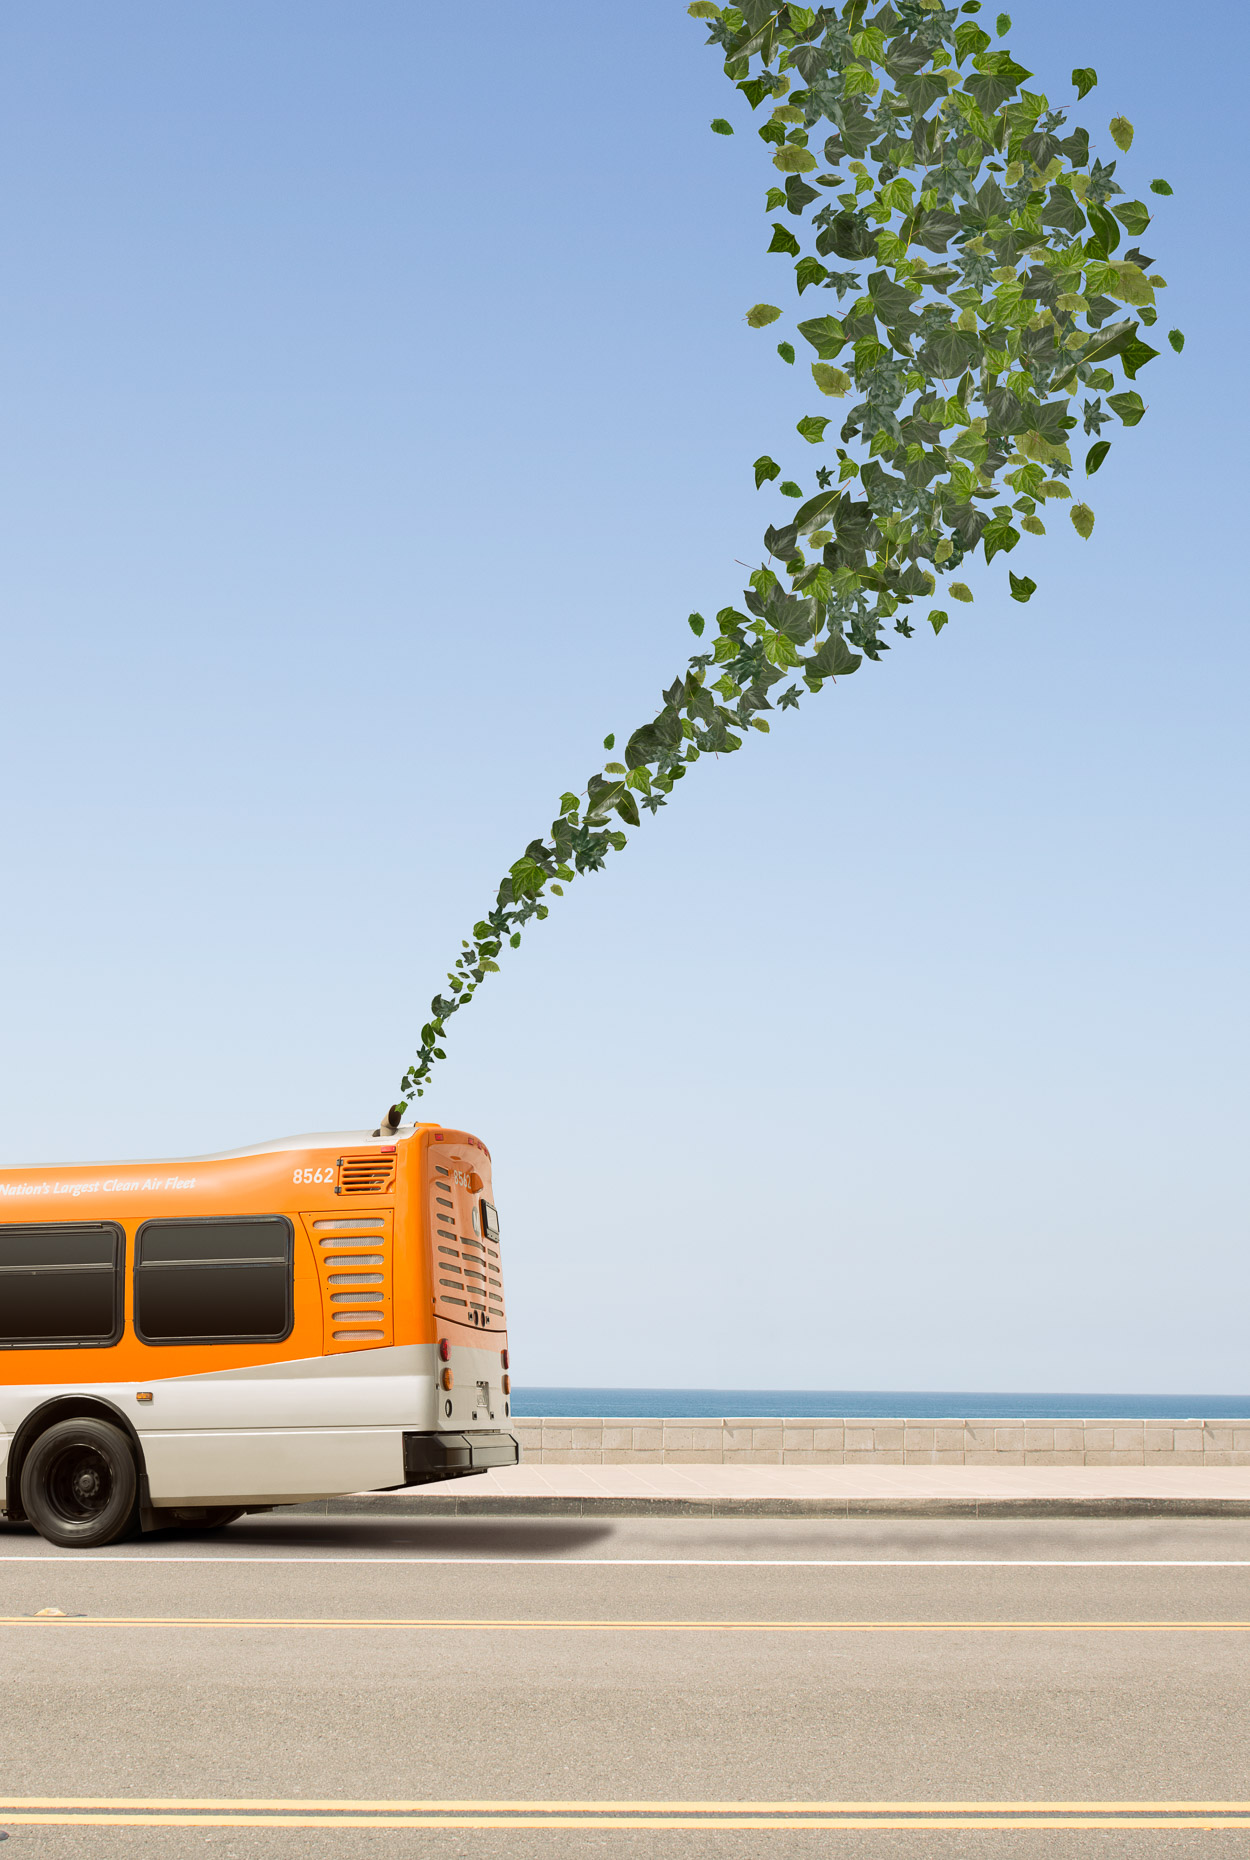 Bus on city street exhausts green leaves into air. David Zaitz